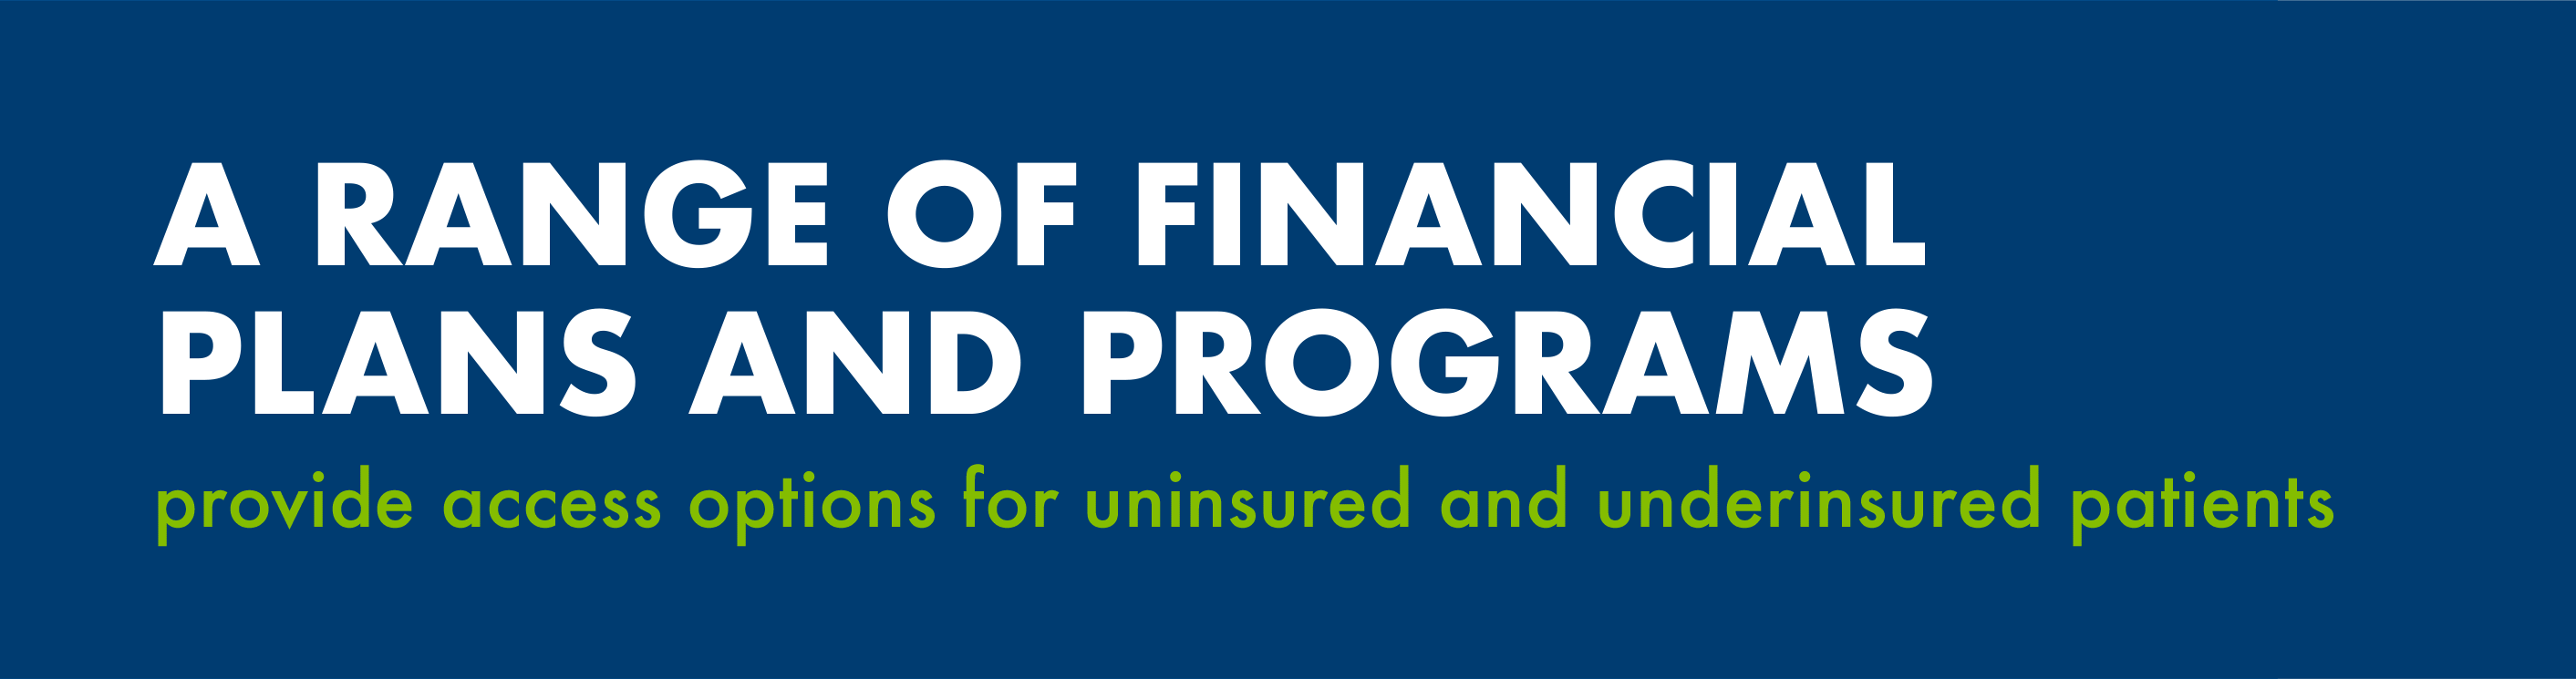 A range of financial plans and programs provide access options for uninsured and underinsured patients